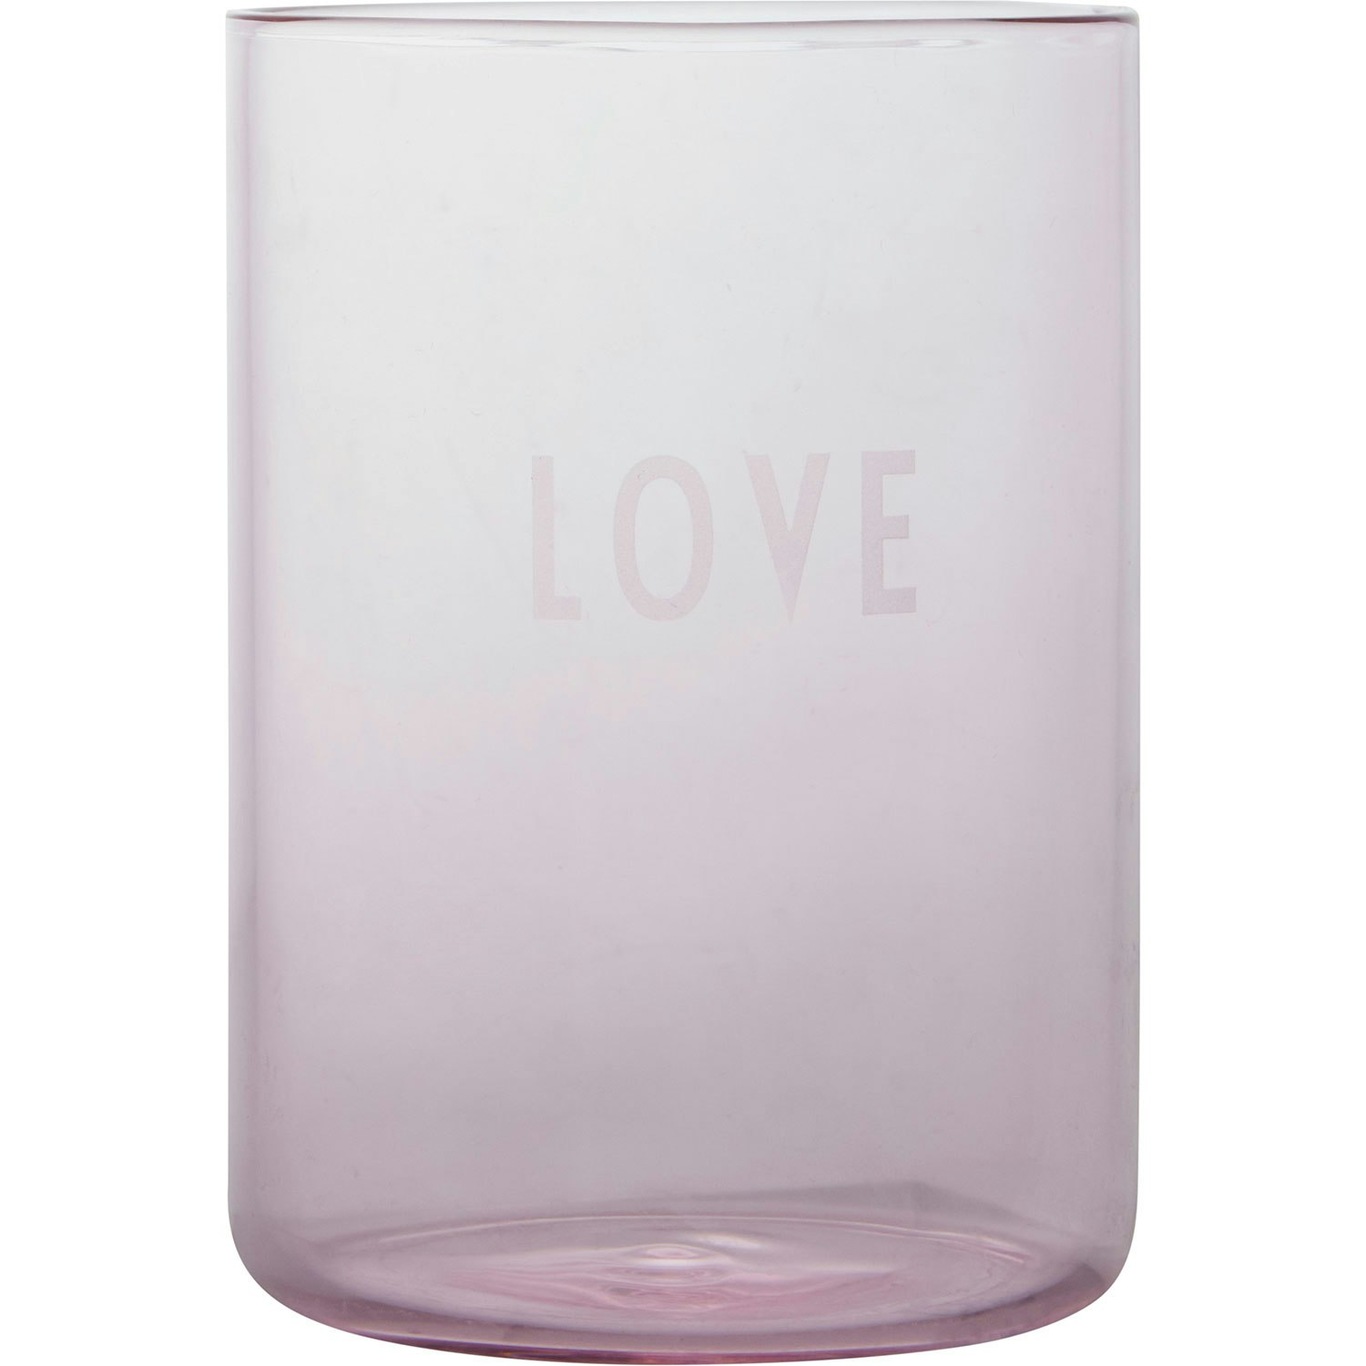 https://royaldesign.com/image/11/design-letters-favourite-drinking-glass-0?w=800&quality=80